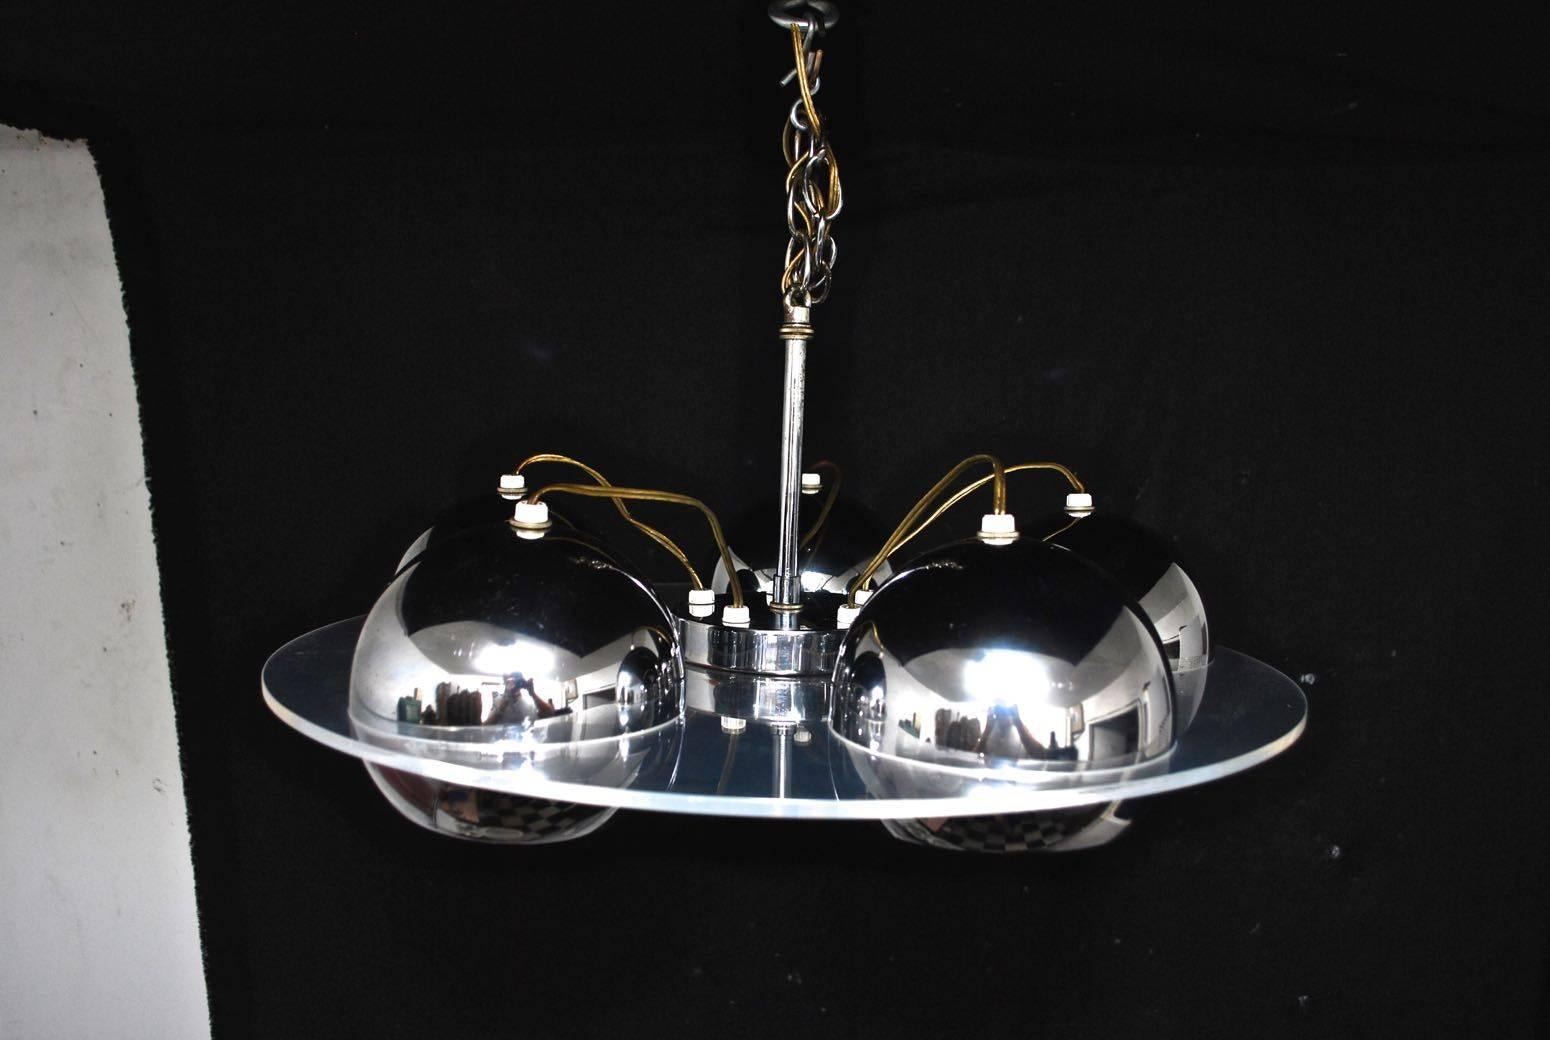 A very nice 1960 lucite and chrome light, each chrome ball is adjustable, so you can create your own design, the height can be shorter or higher if you like.

We have over three thousand antique sconces and over one thousand antique lights, if you